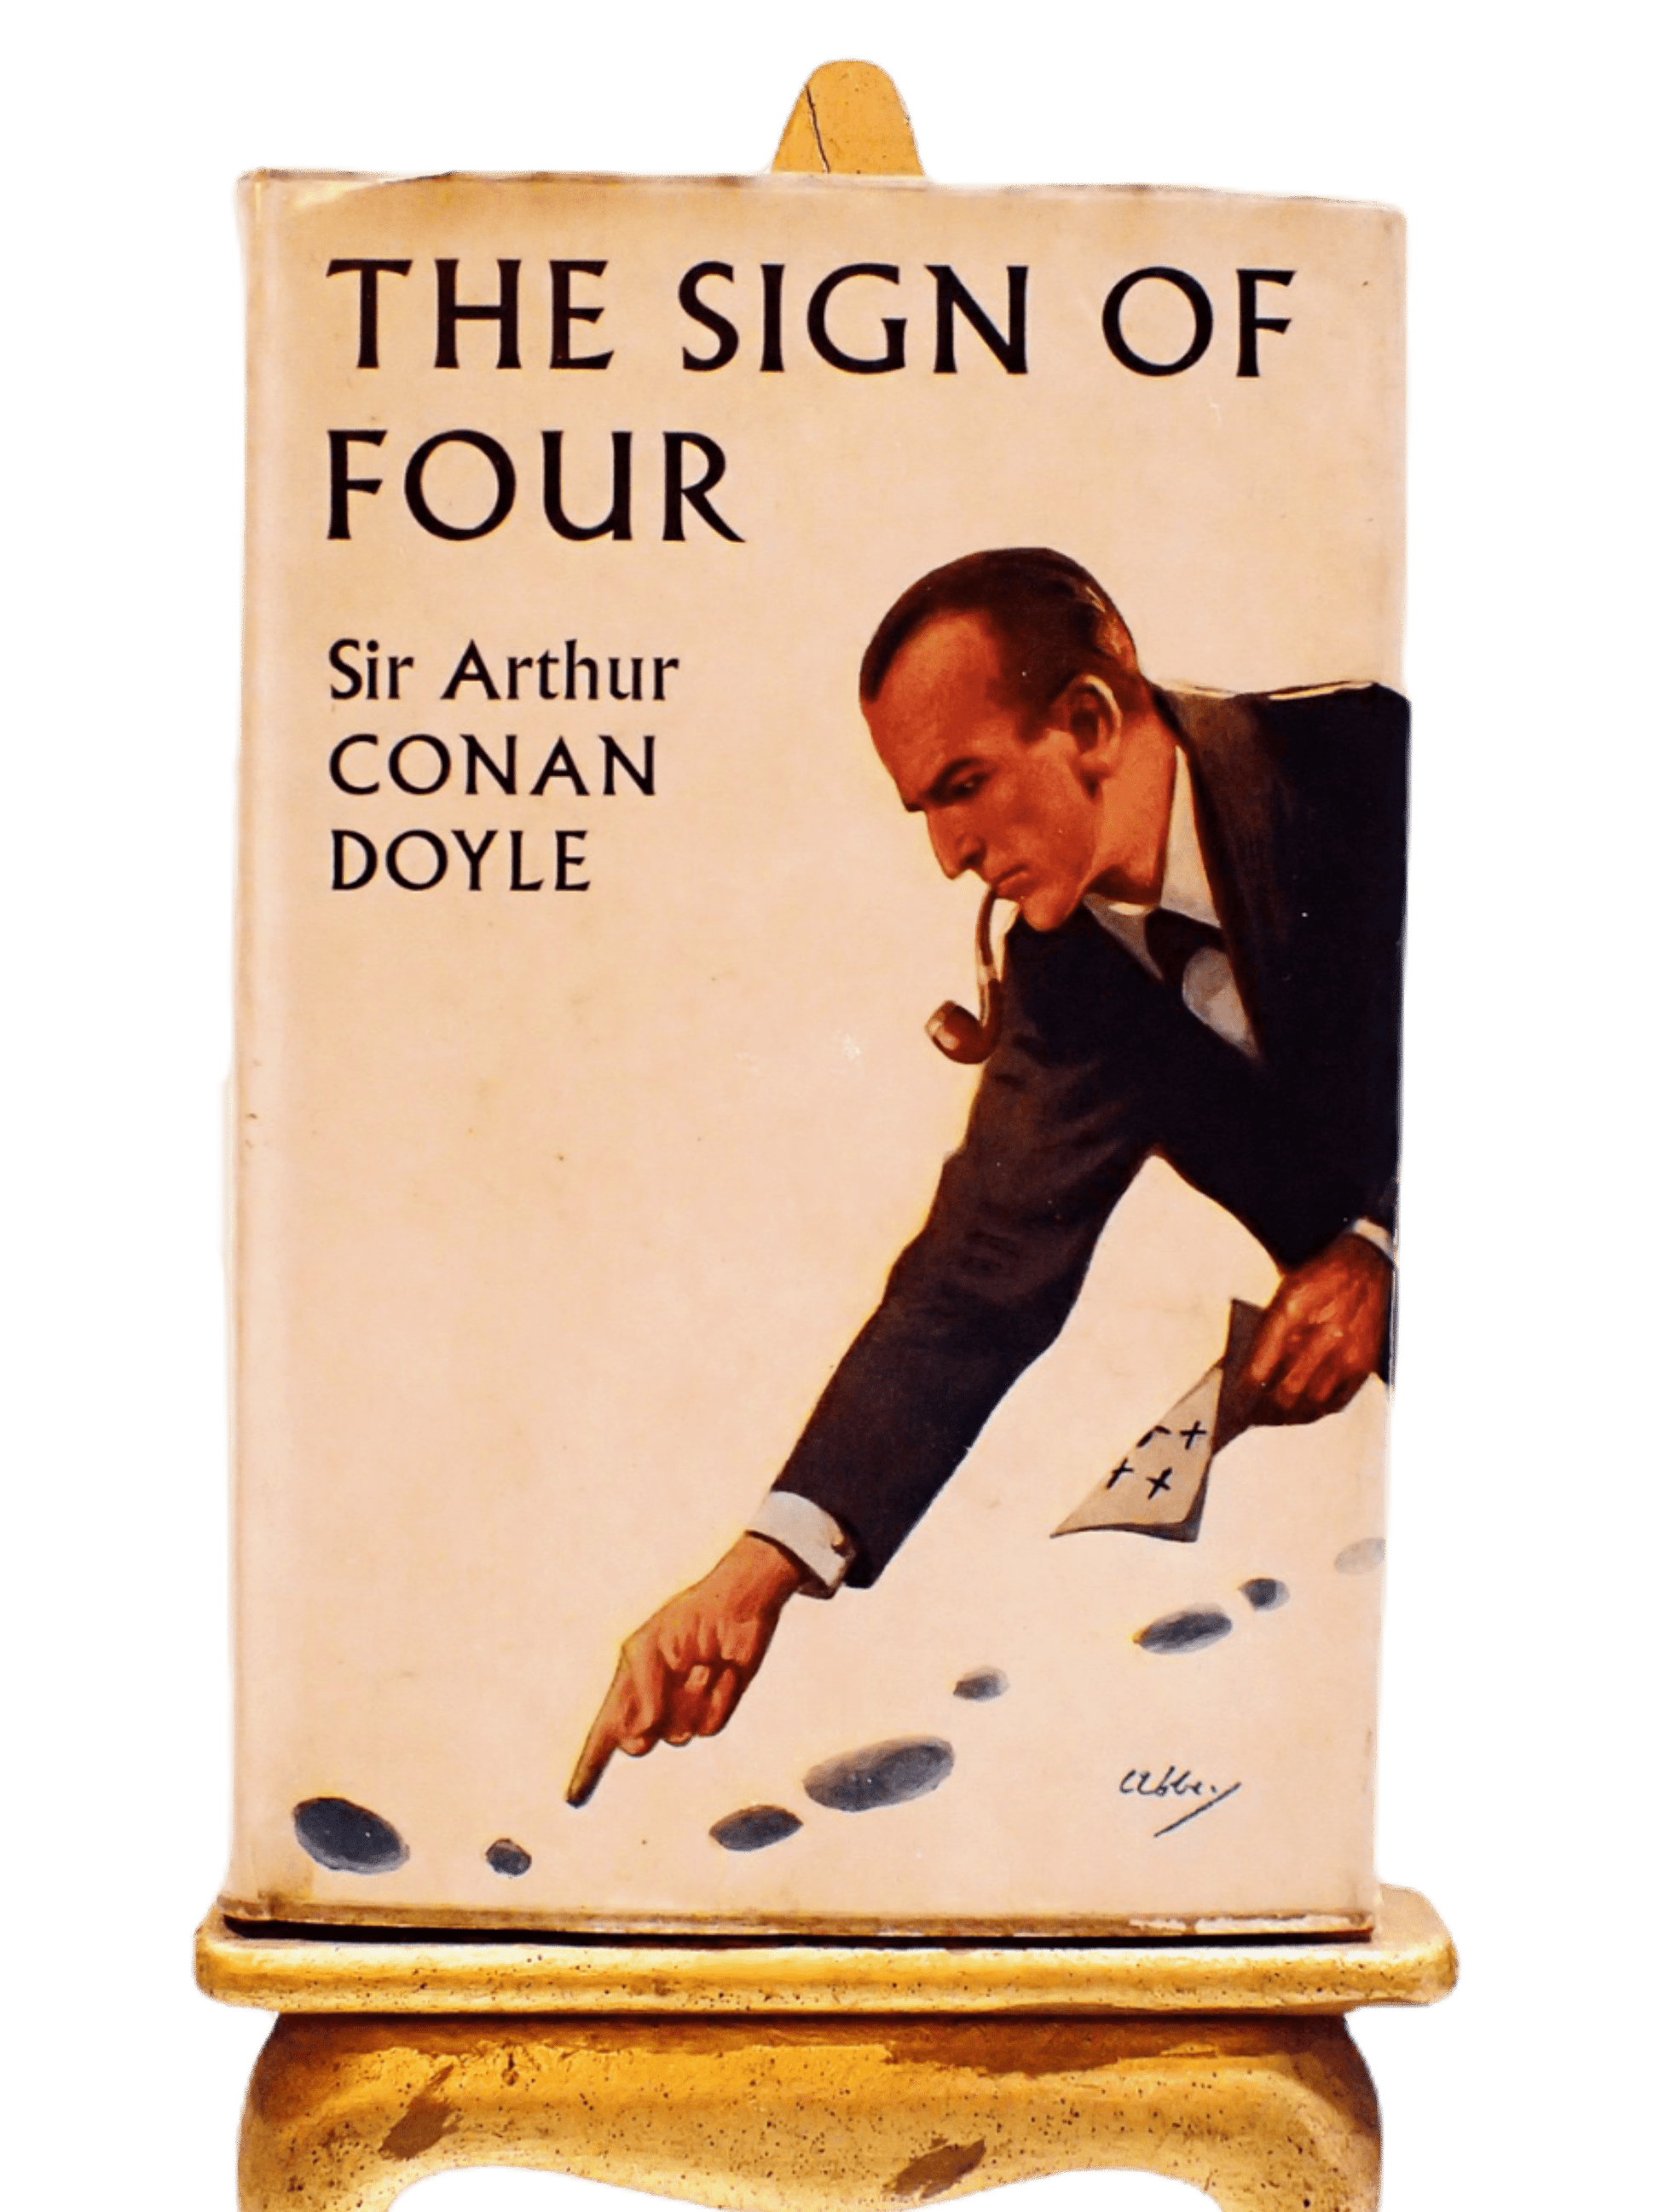 Front Cover of The Sign of the Four Arthur Conan Doyle showing the detective pointing to footsteps. 